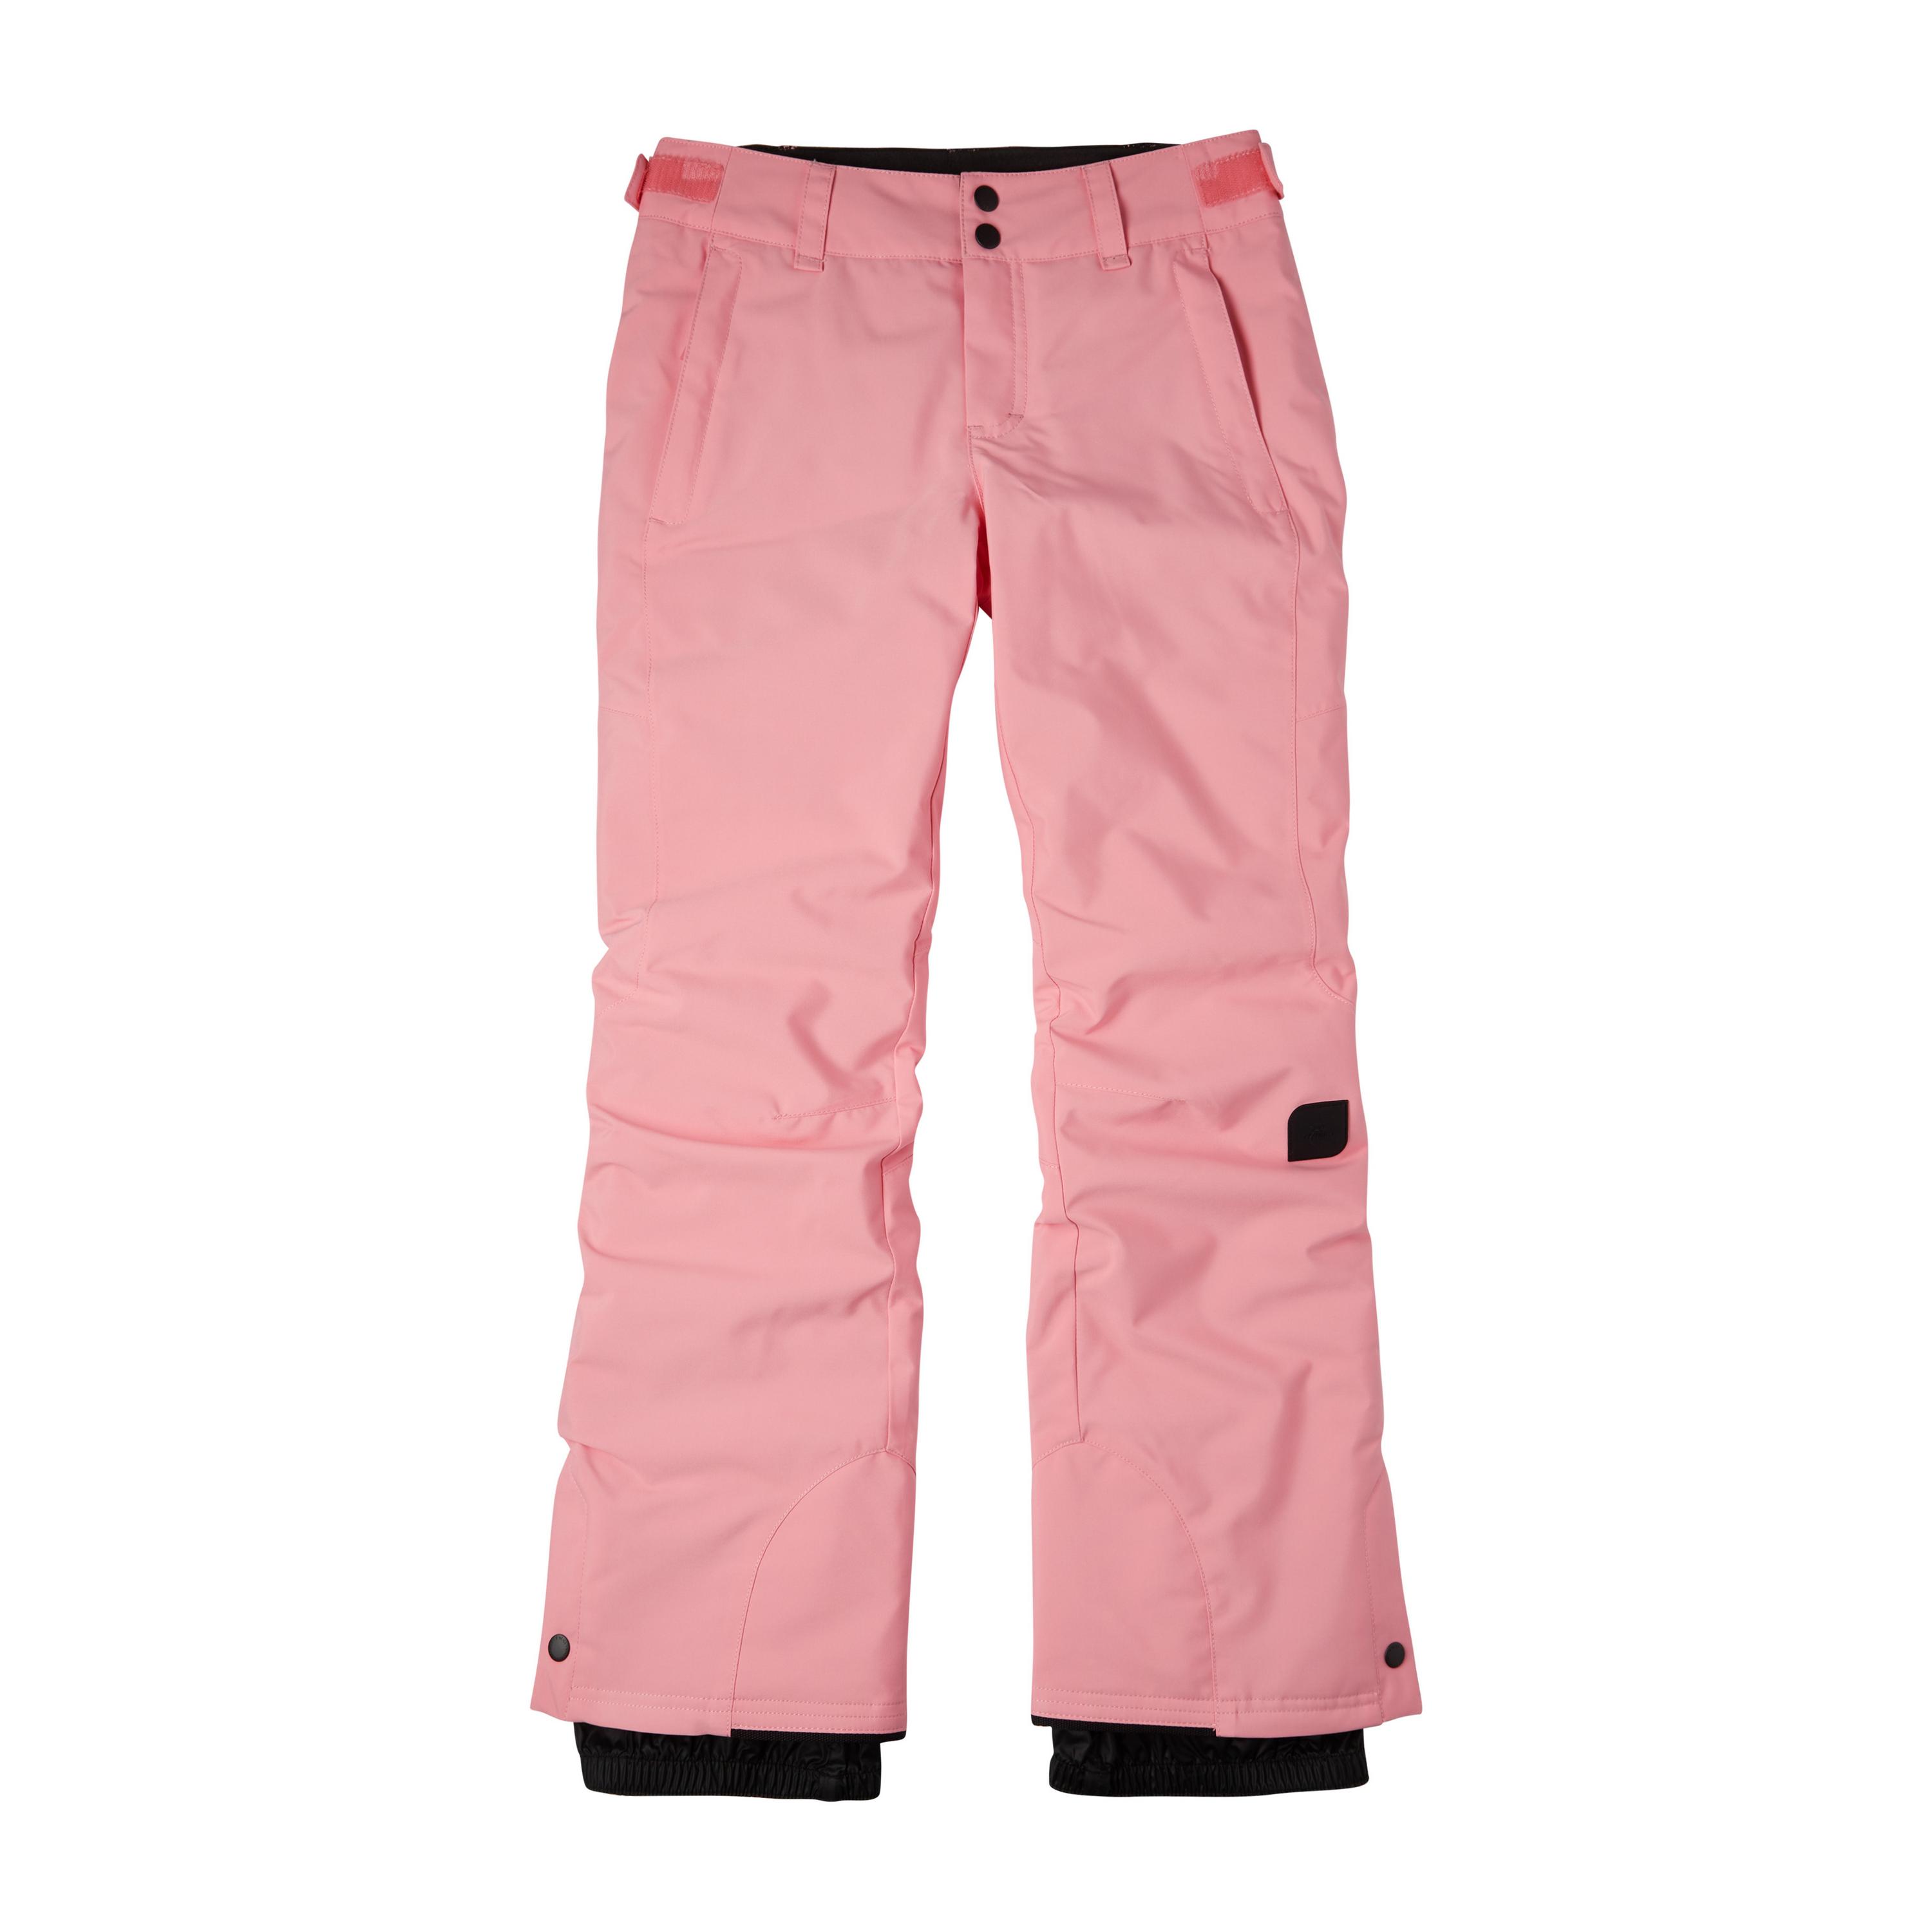 Image of O'NEILL Charm Snowboardhose Mädchen